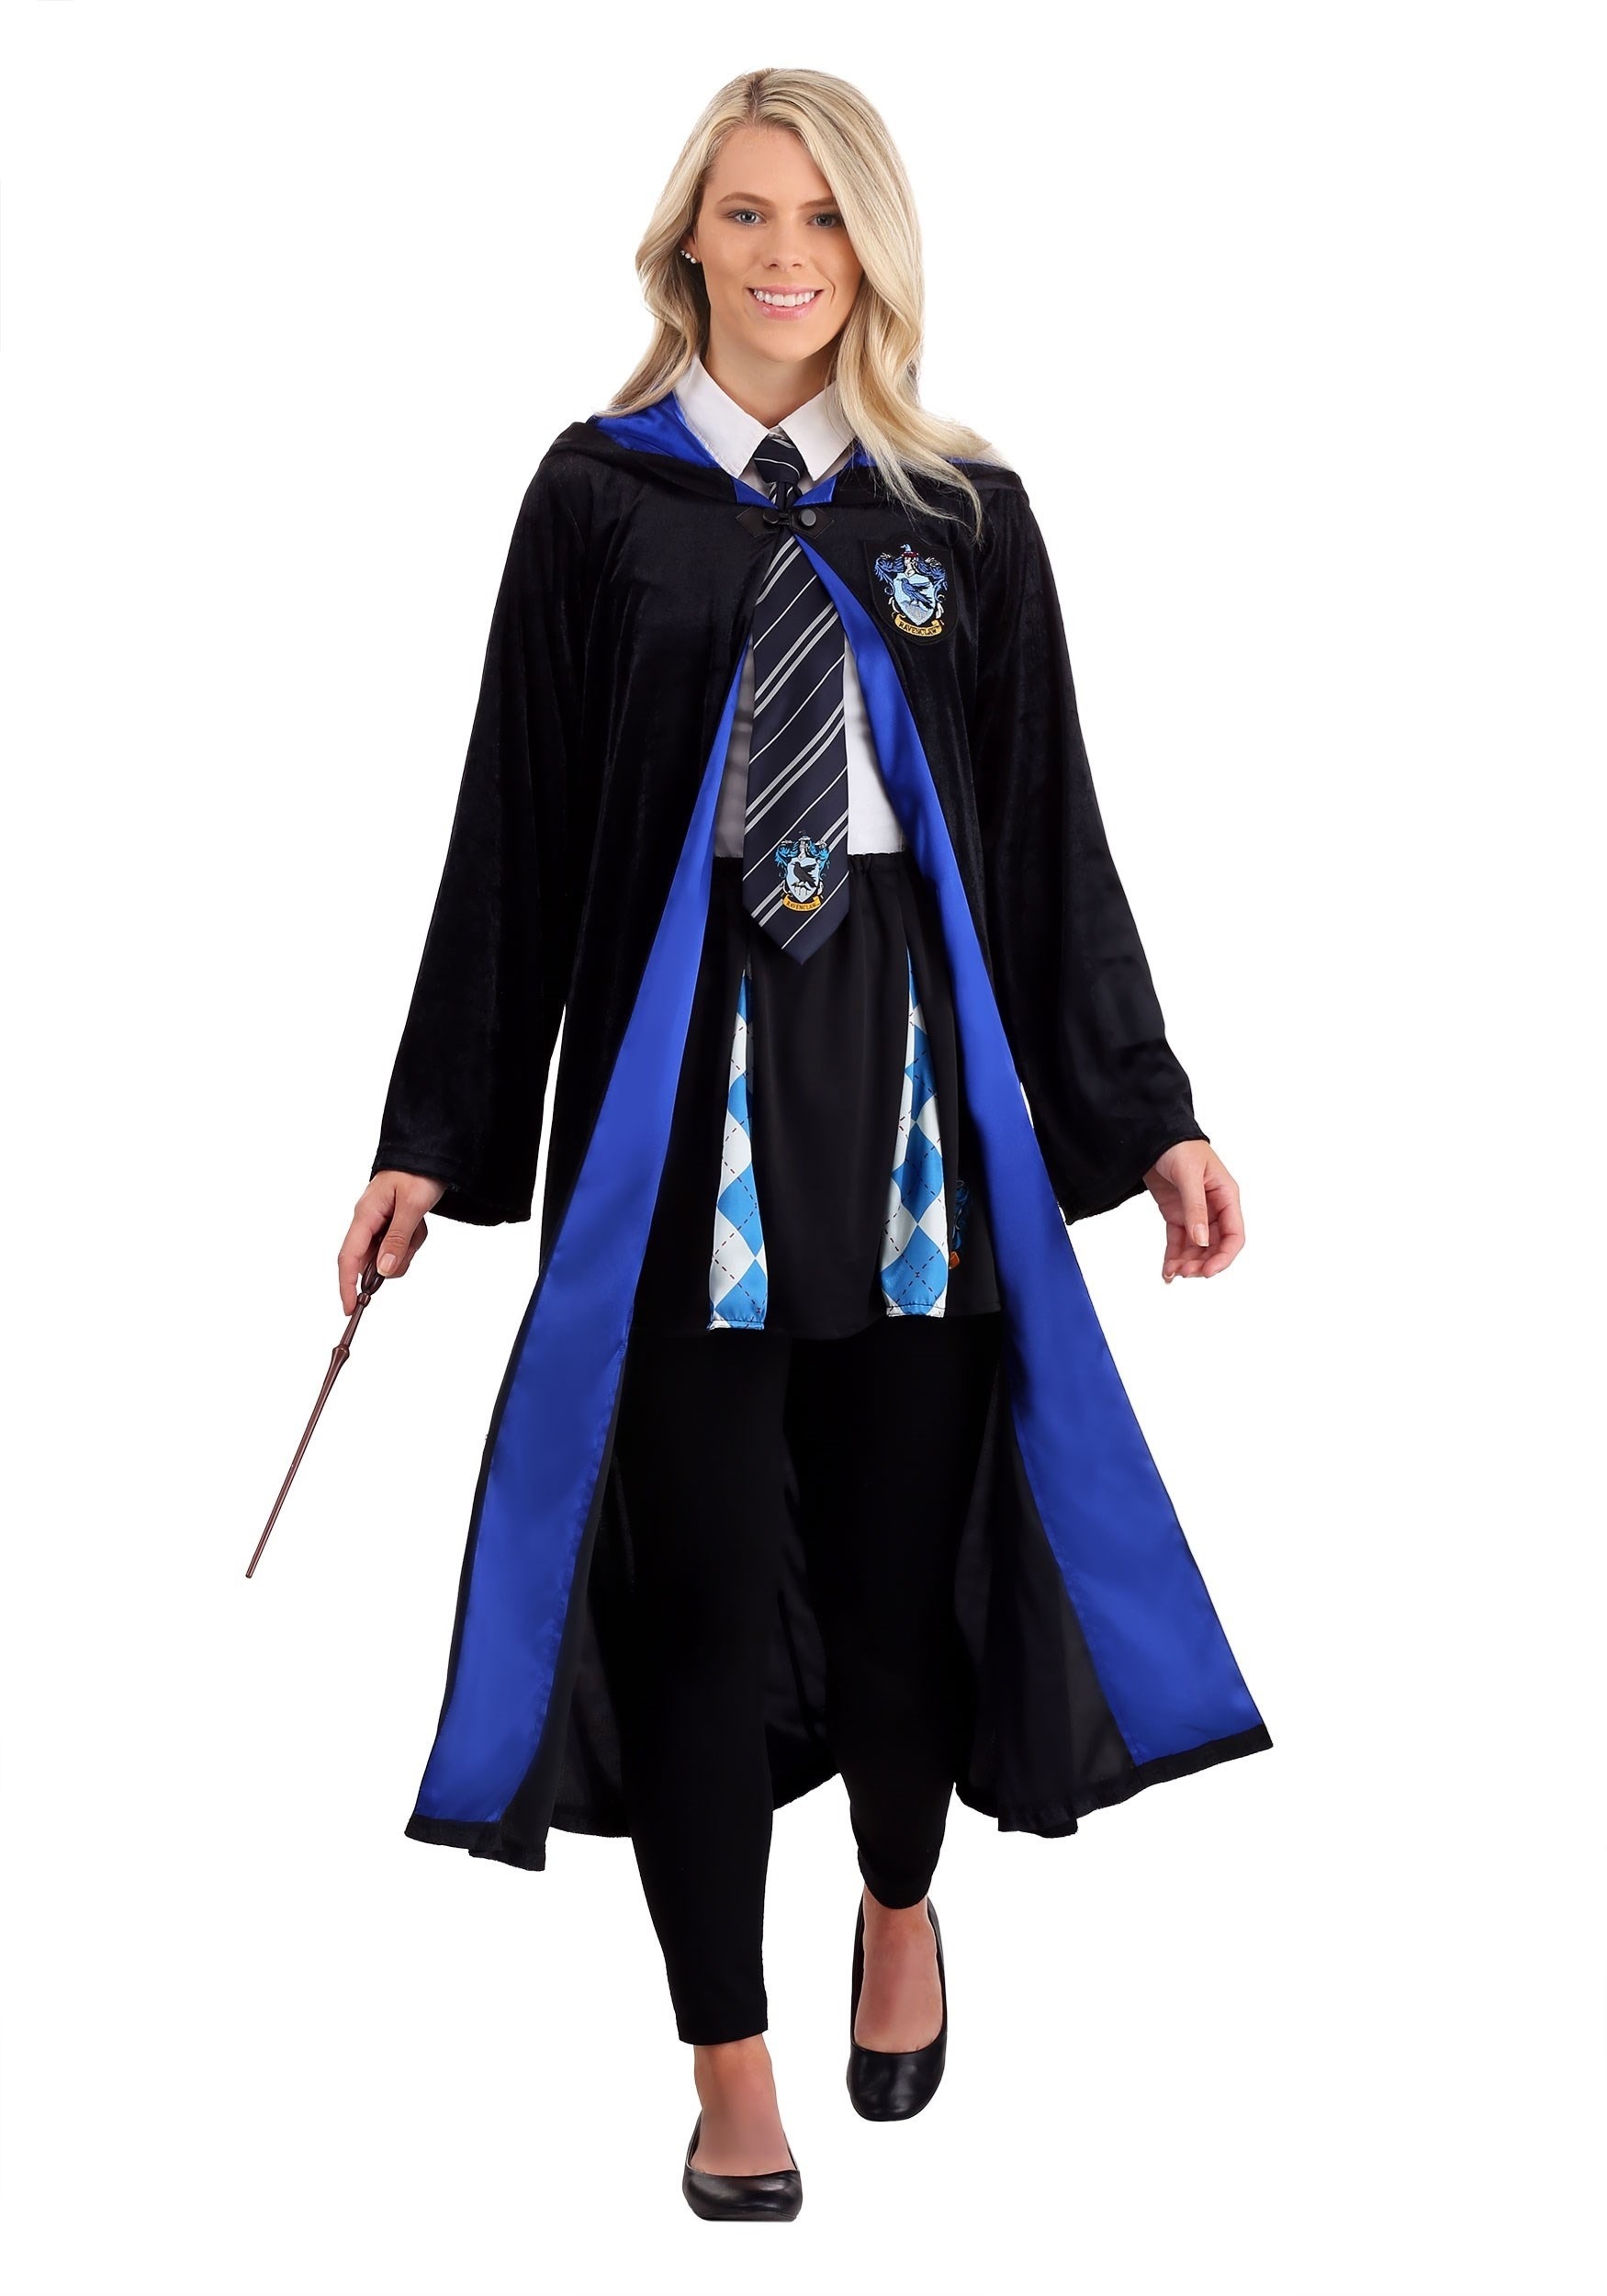 Photos - Fancy Dress Potter Jerry Leigh Harry  Deluxe Ravenclaw Robe for Adults Black/Blue F 